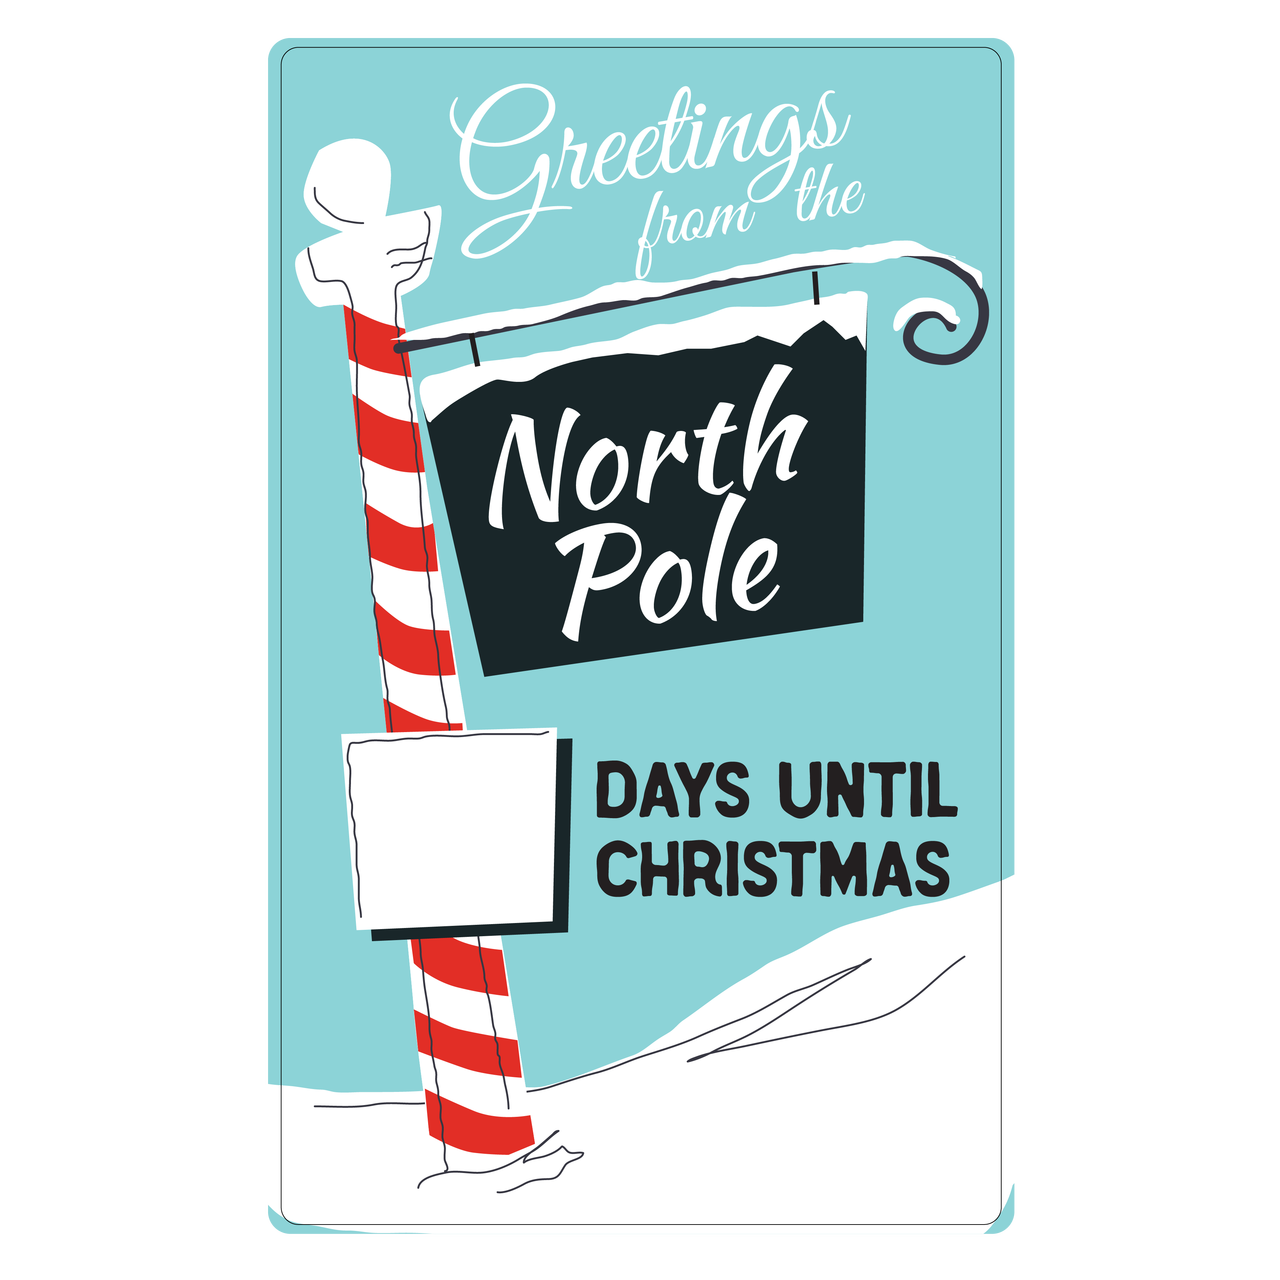 Greetings from the North Pole Print & Cut File